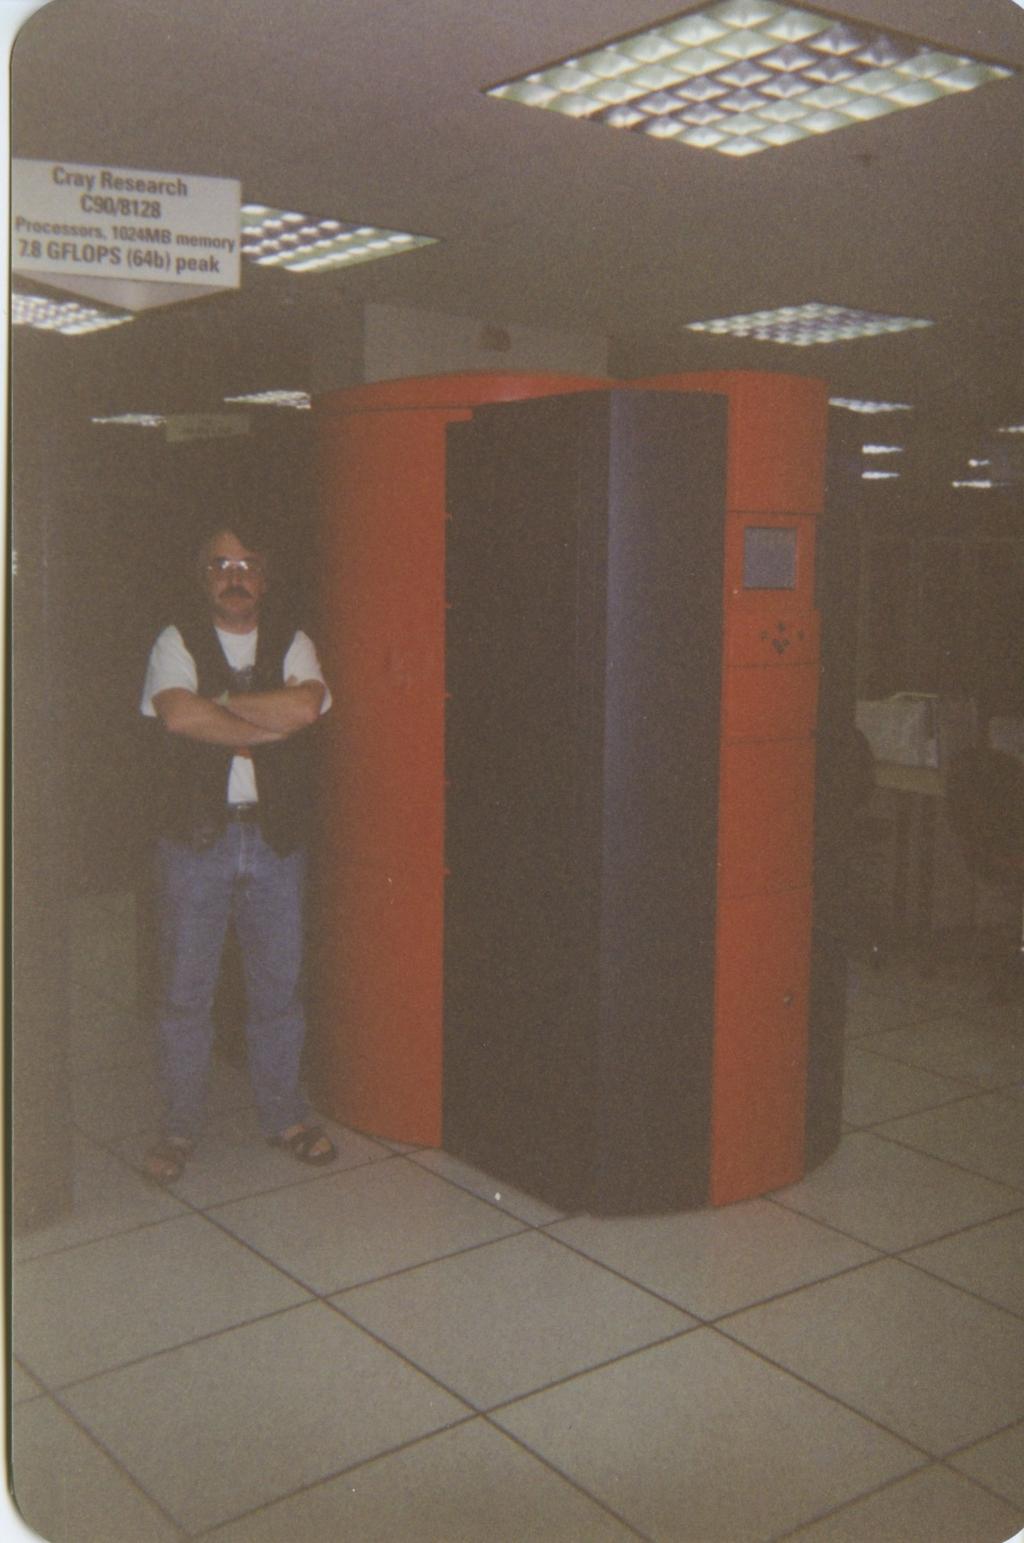 Peter Taylor Peter with his Cray, San Diego Supercomputer